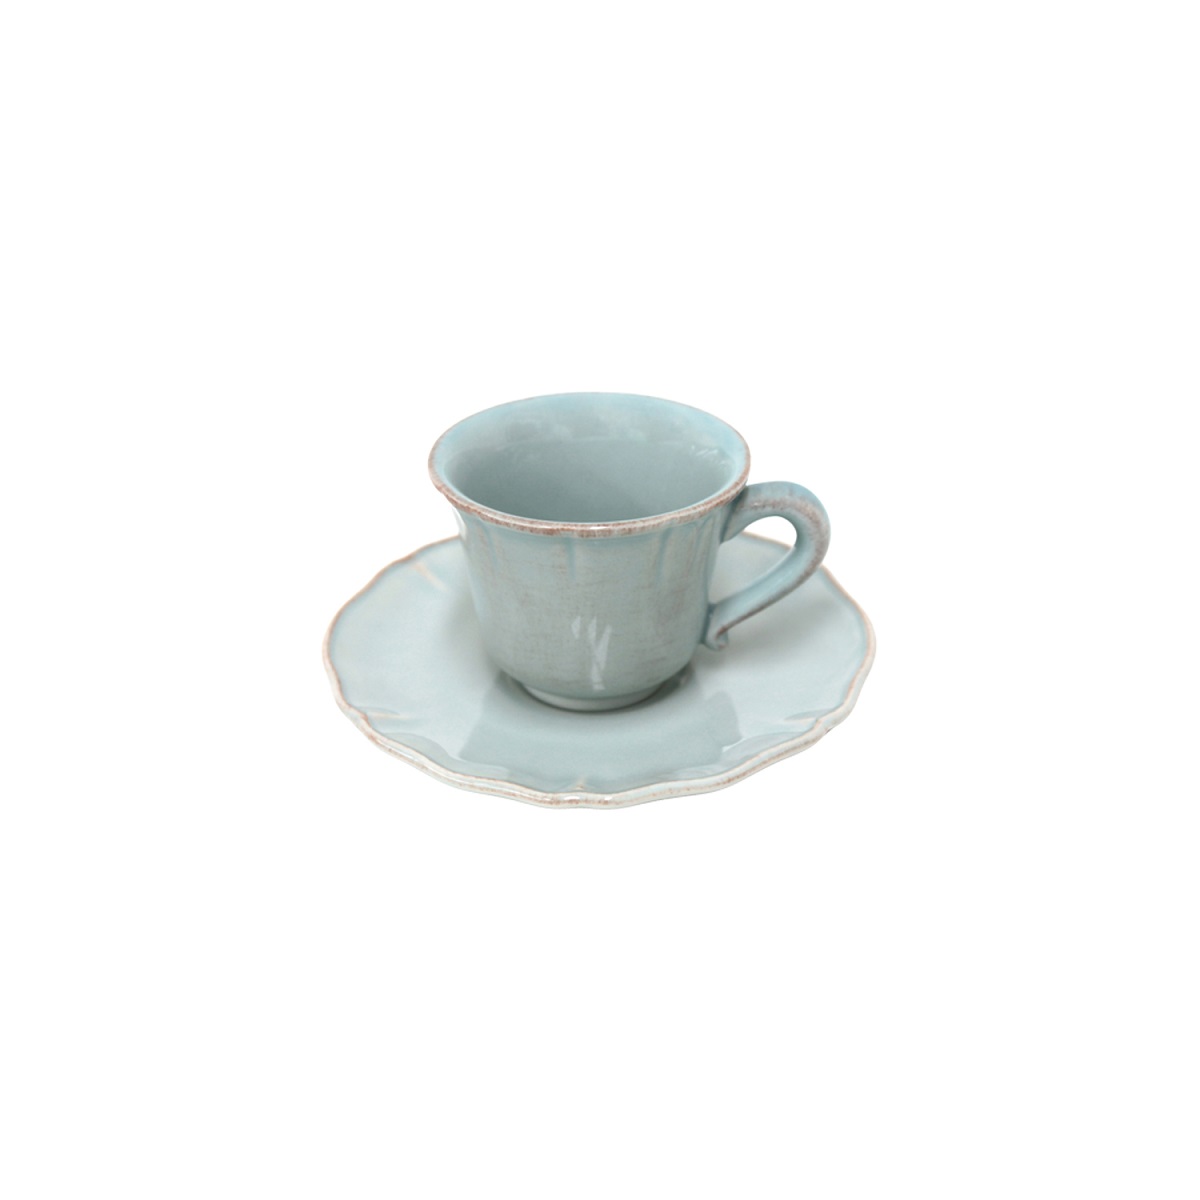 Alentejo Turquoise Coffee Cup & Saucer Gift